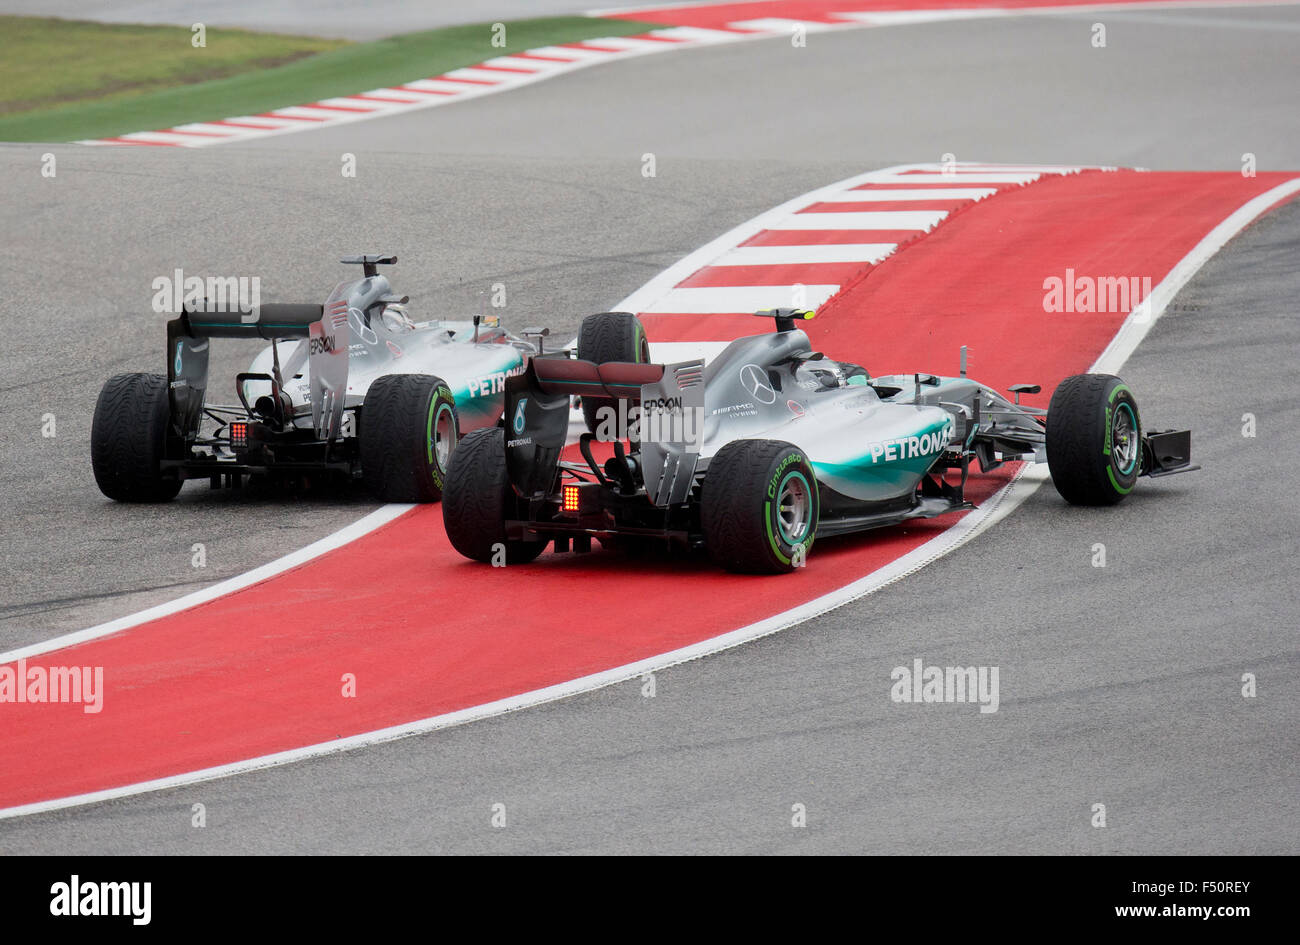 Austin, Texas USA October 25, 2015: Formula 1 teammates Nico Rosberg, left and Lewis Hamilton collide on turn one to start the United States Grand Prix in Austin.  Hamilton won the rain-soaked over Rosberg to give him the world title for 2015. Stock Photo